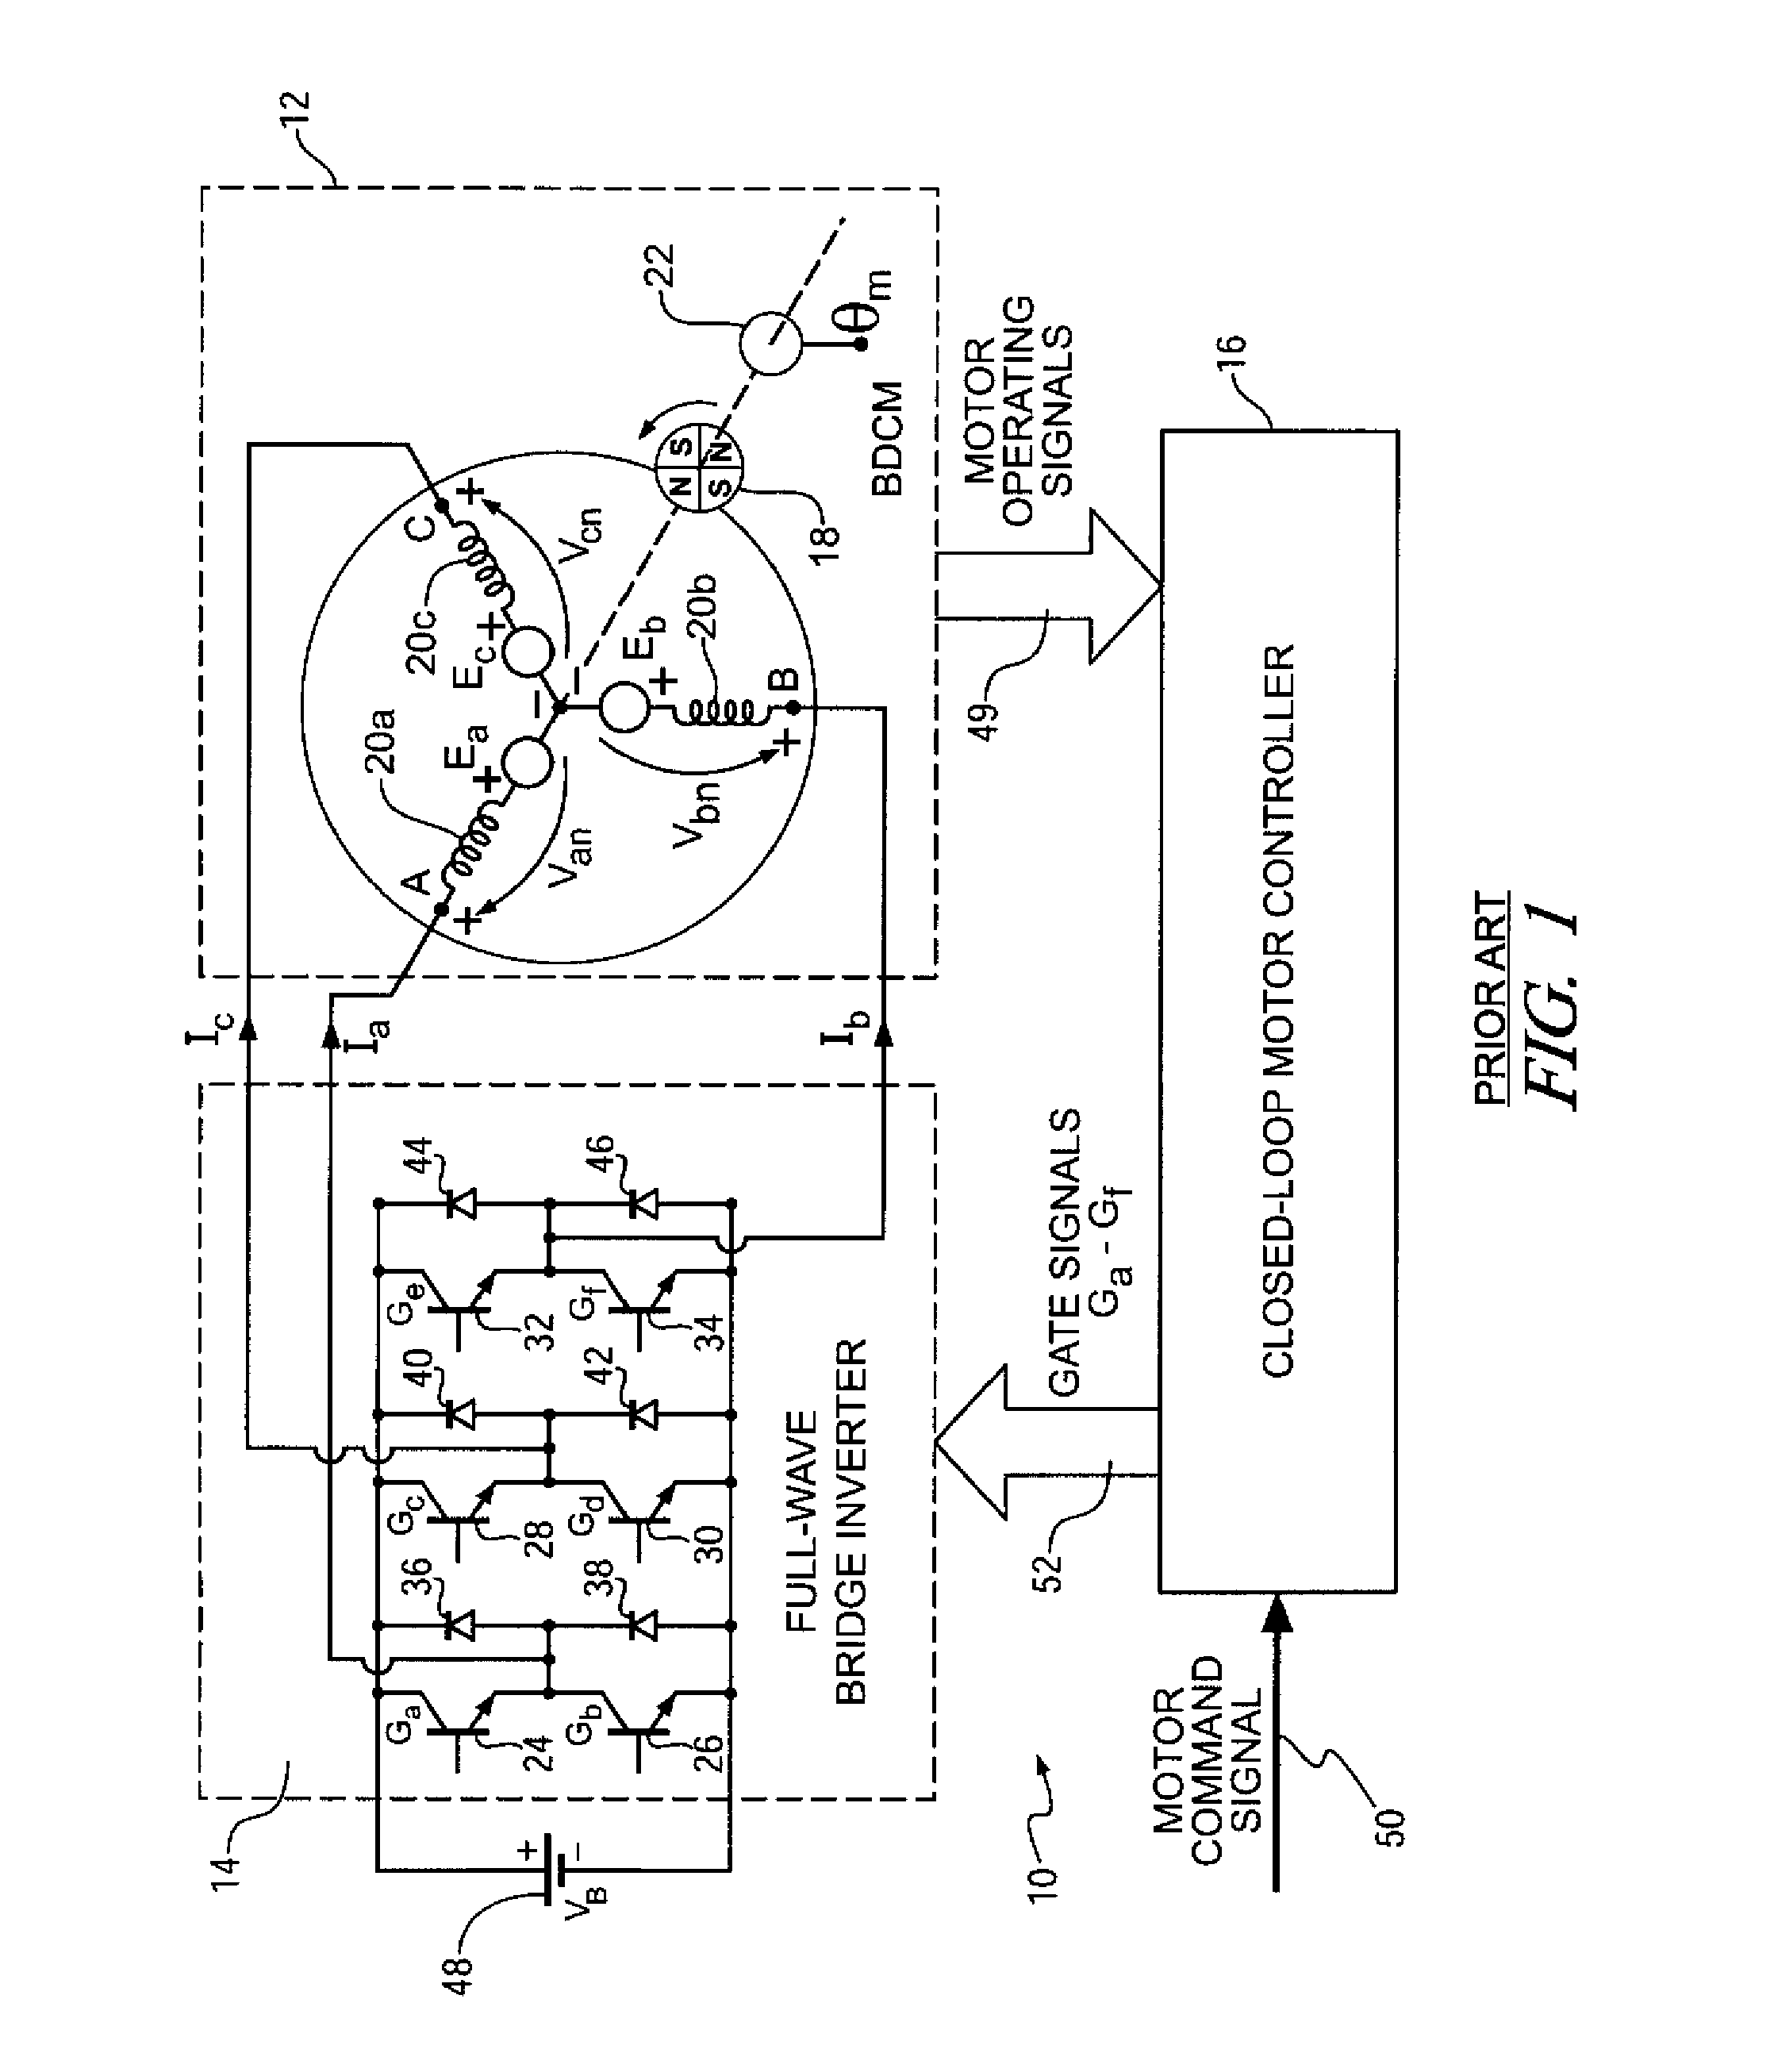 Control device for driving a brushless DC motor